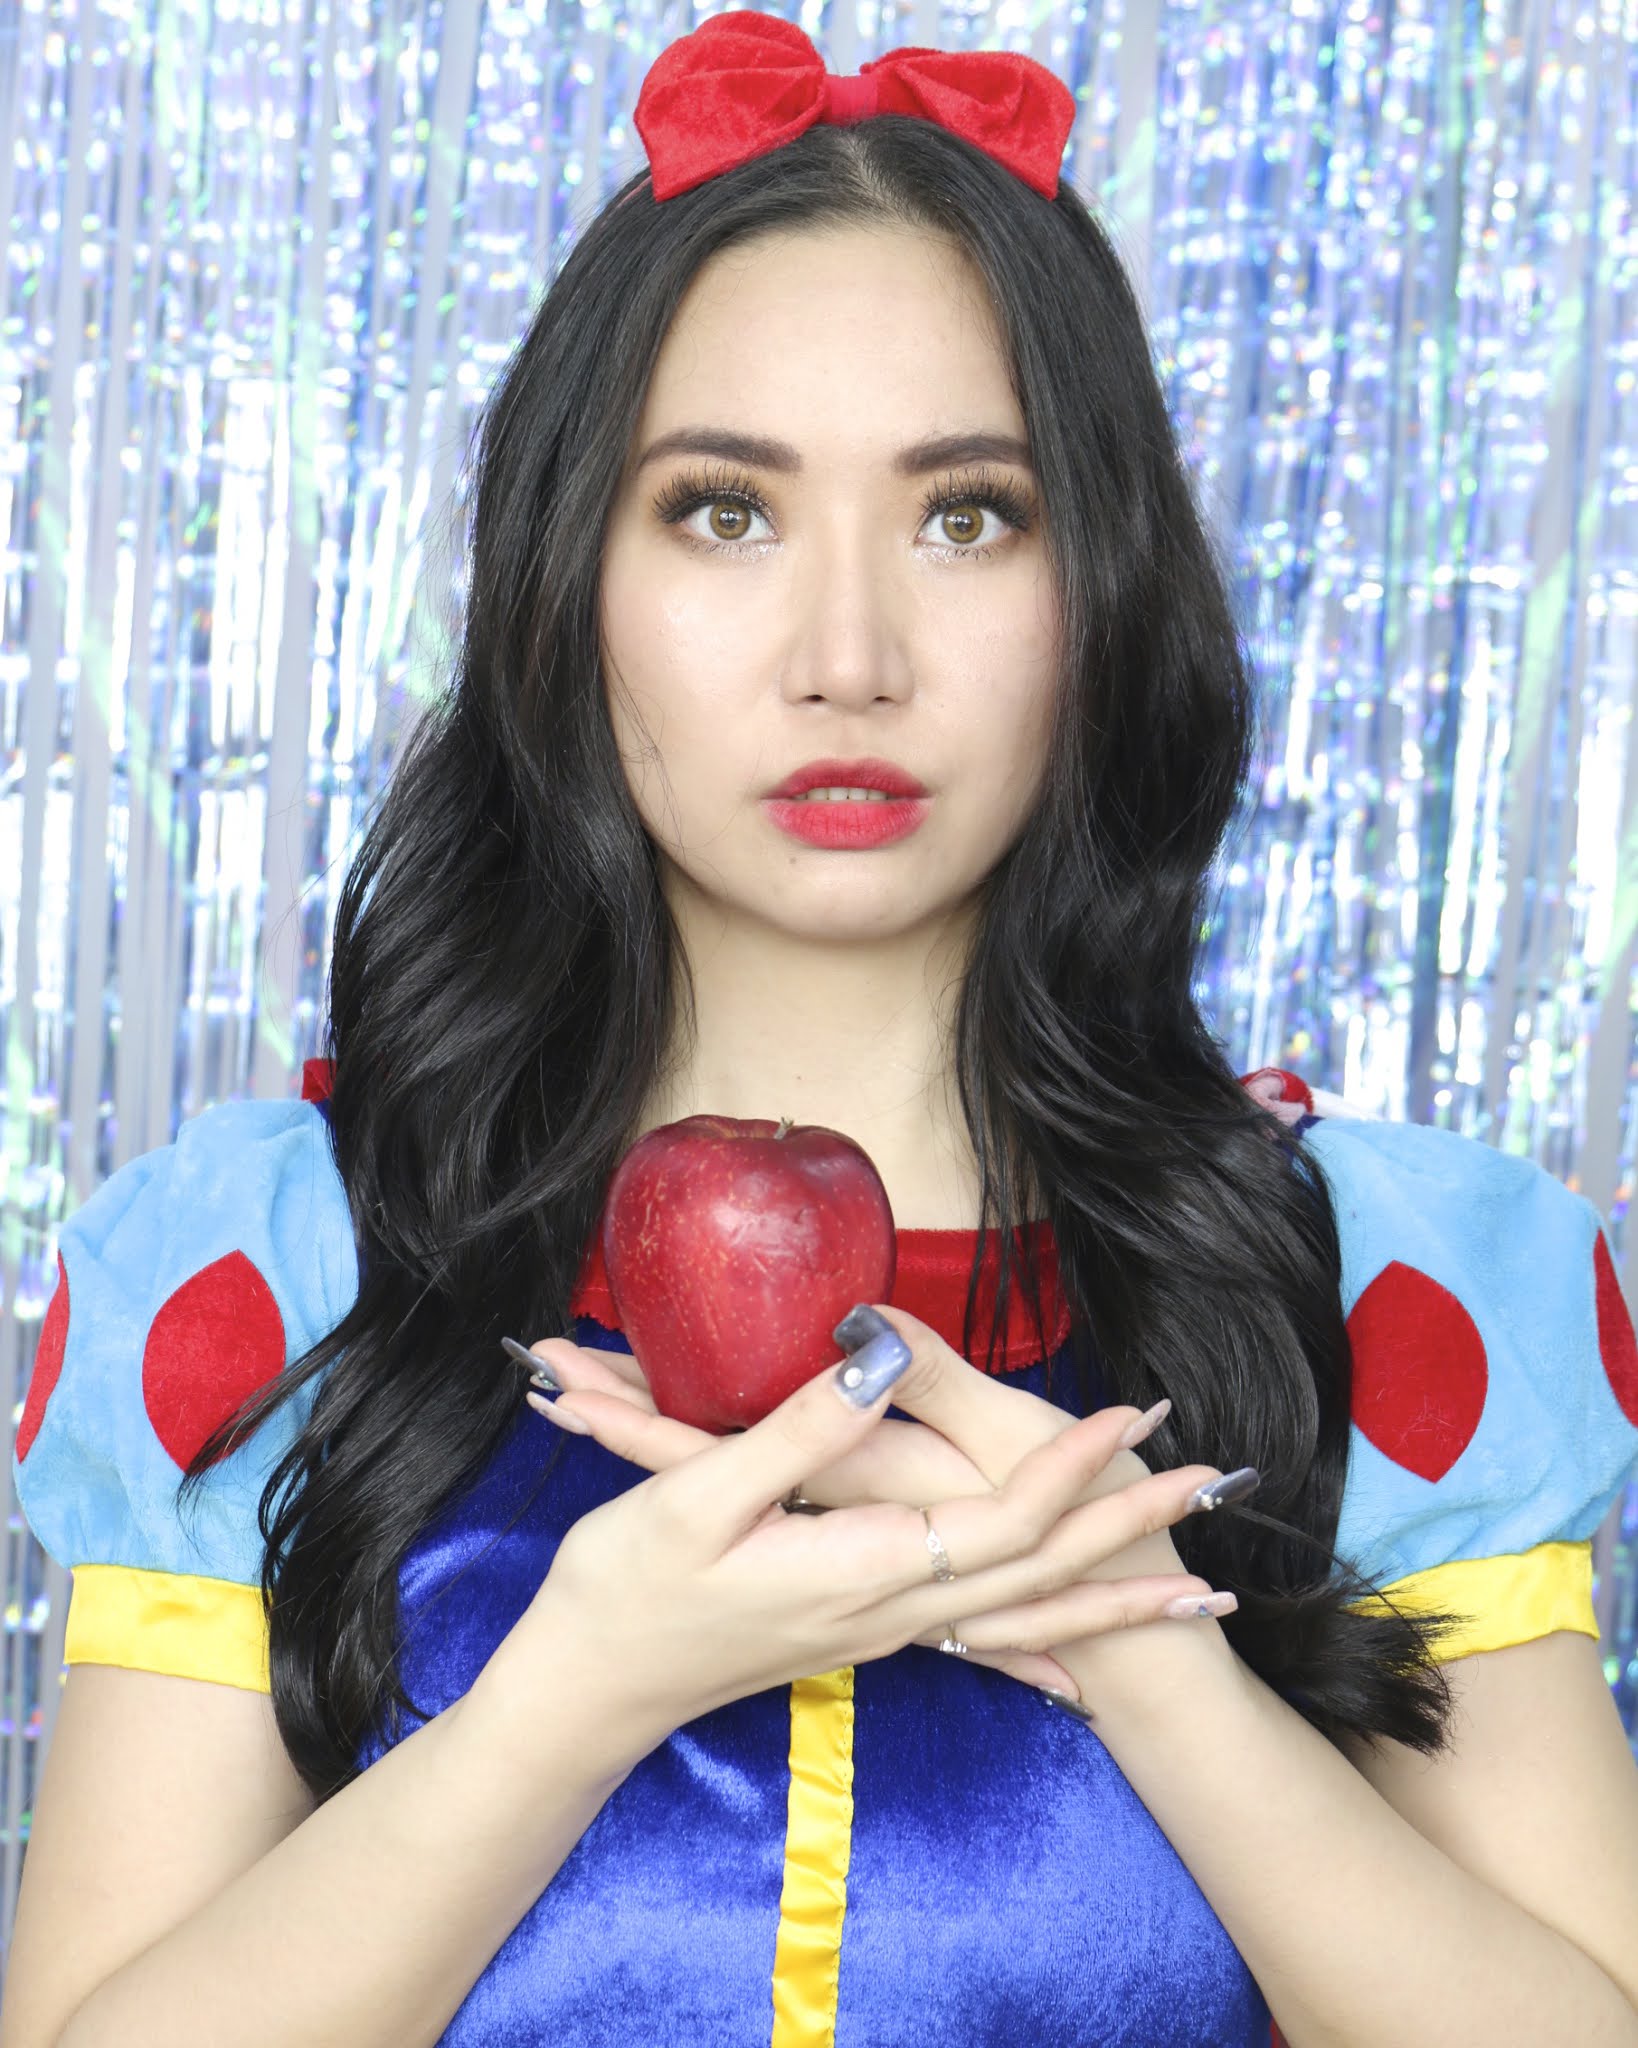 New  Upload: Snow White Makeup Look